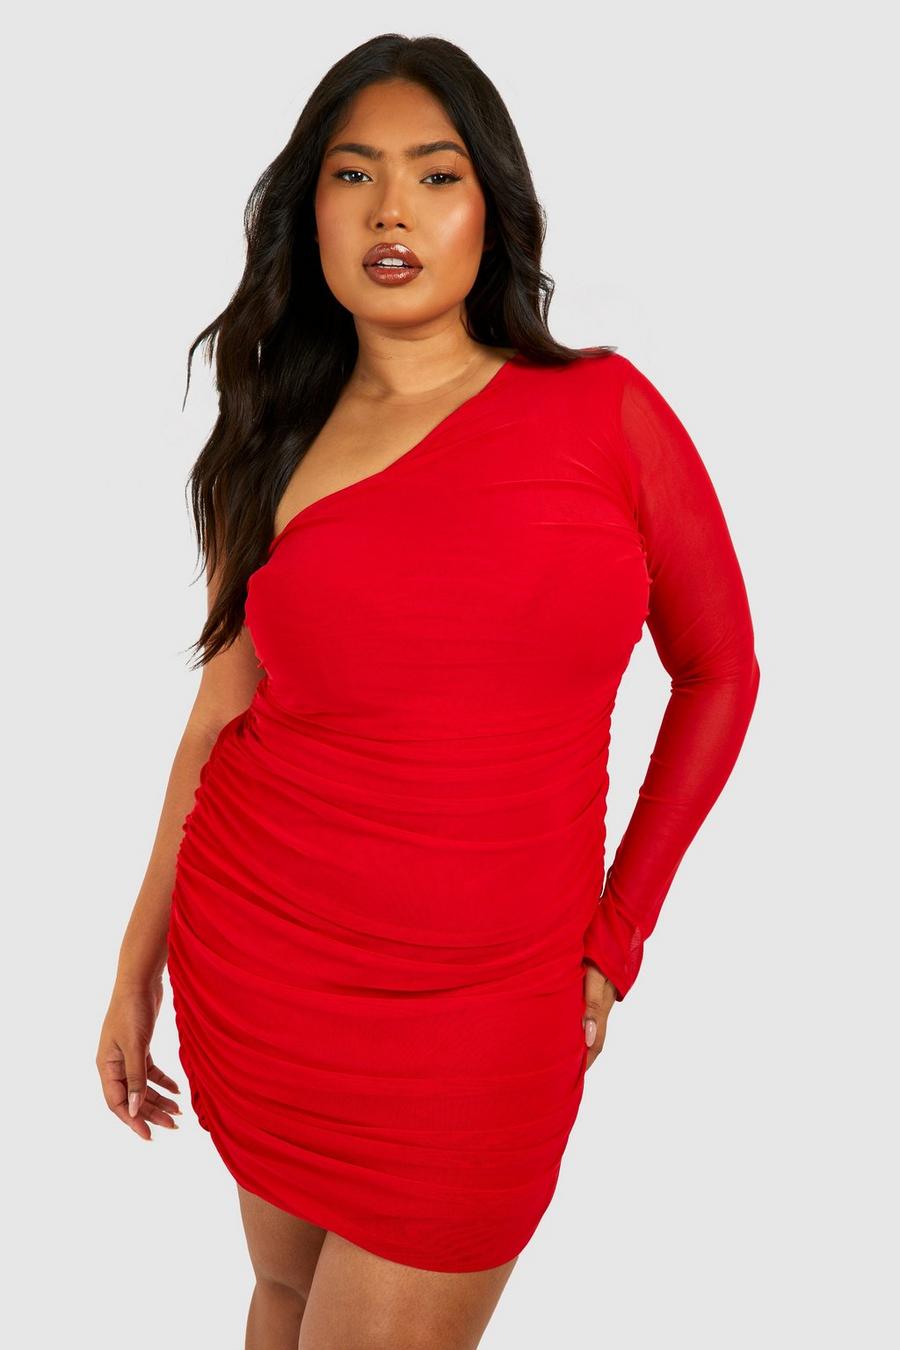  for Women Dress Plus One Shoulder Ruched Bodycon Dress